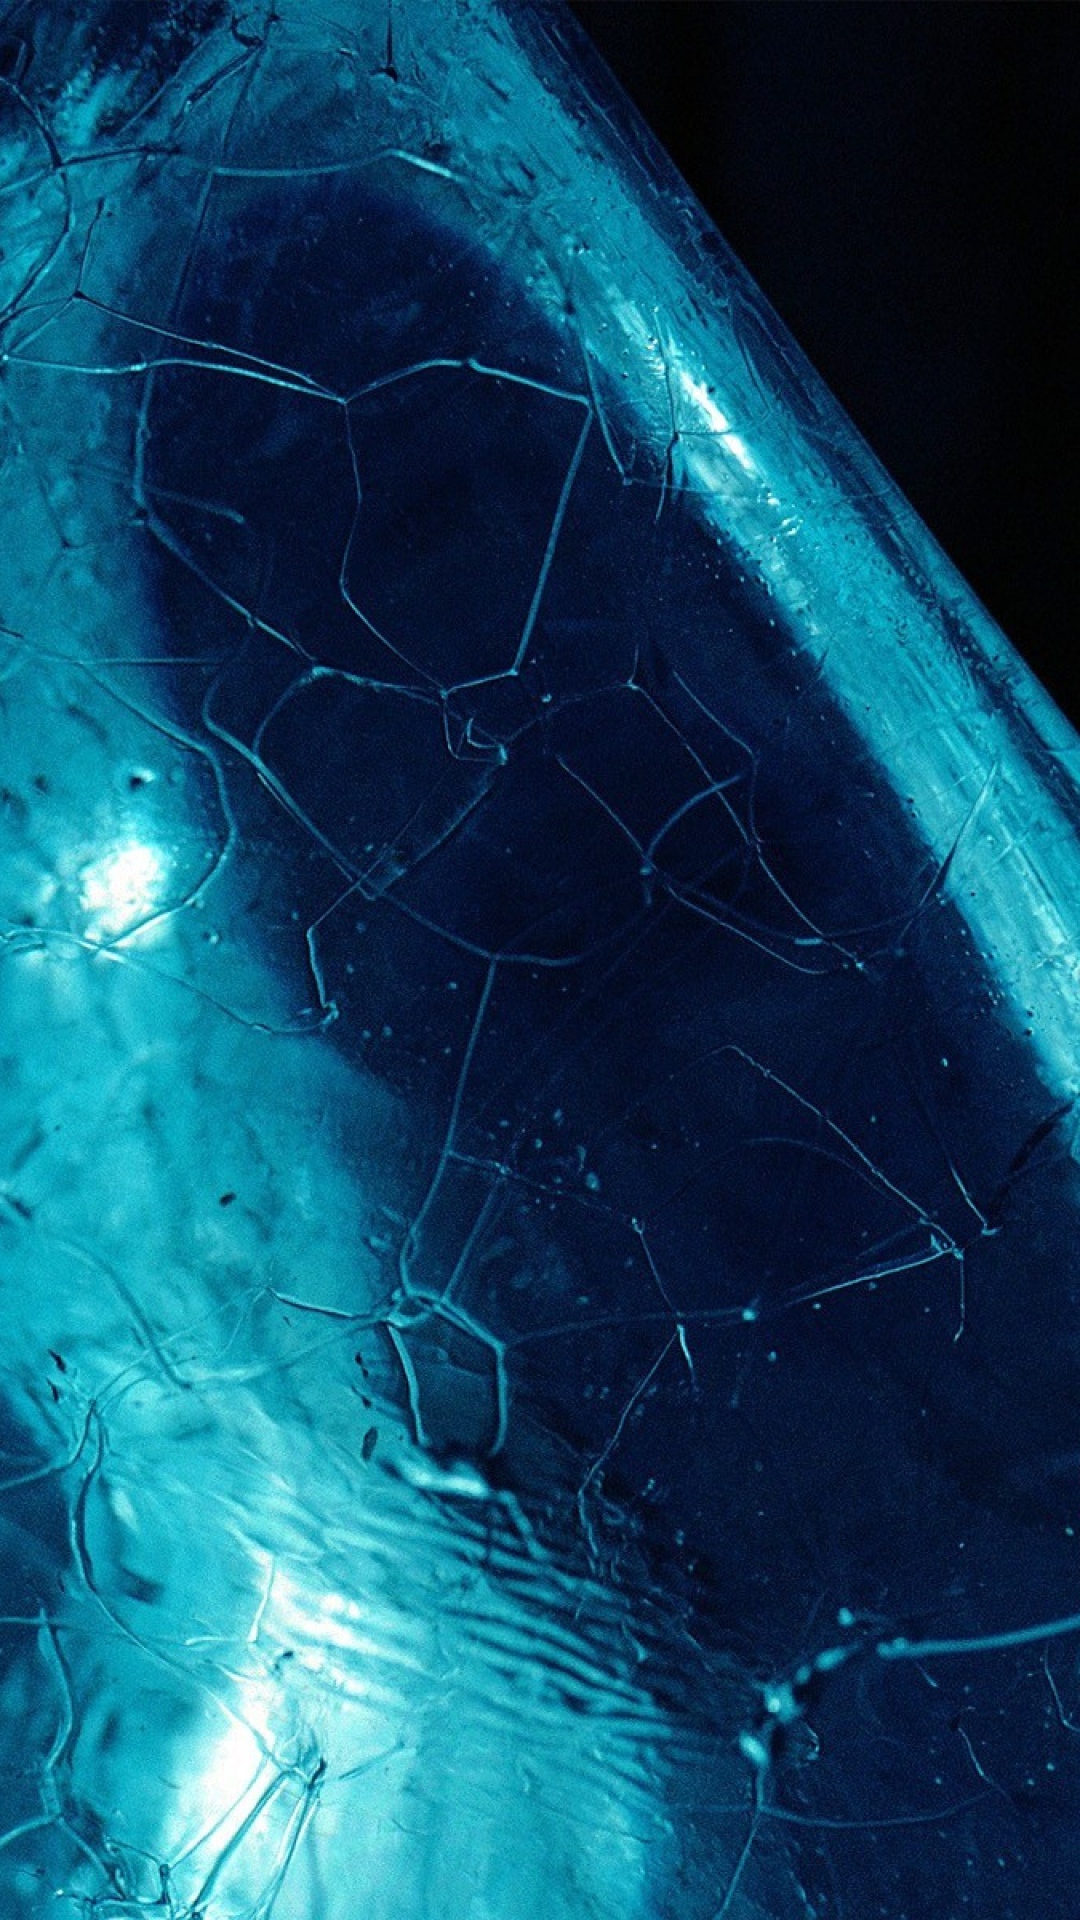 Cracked Screen Wallpaper for Android Free Download | PixelsTalk.Net